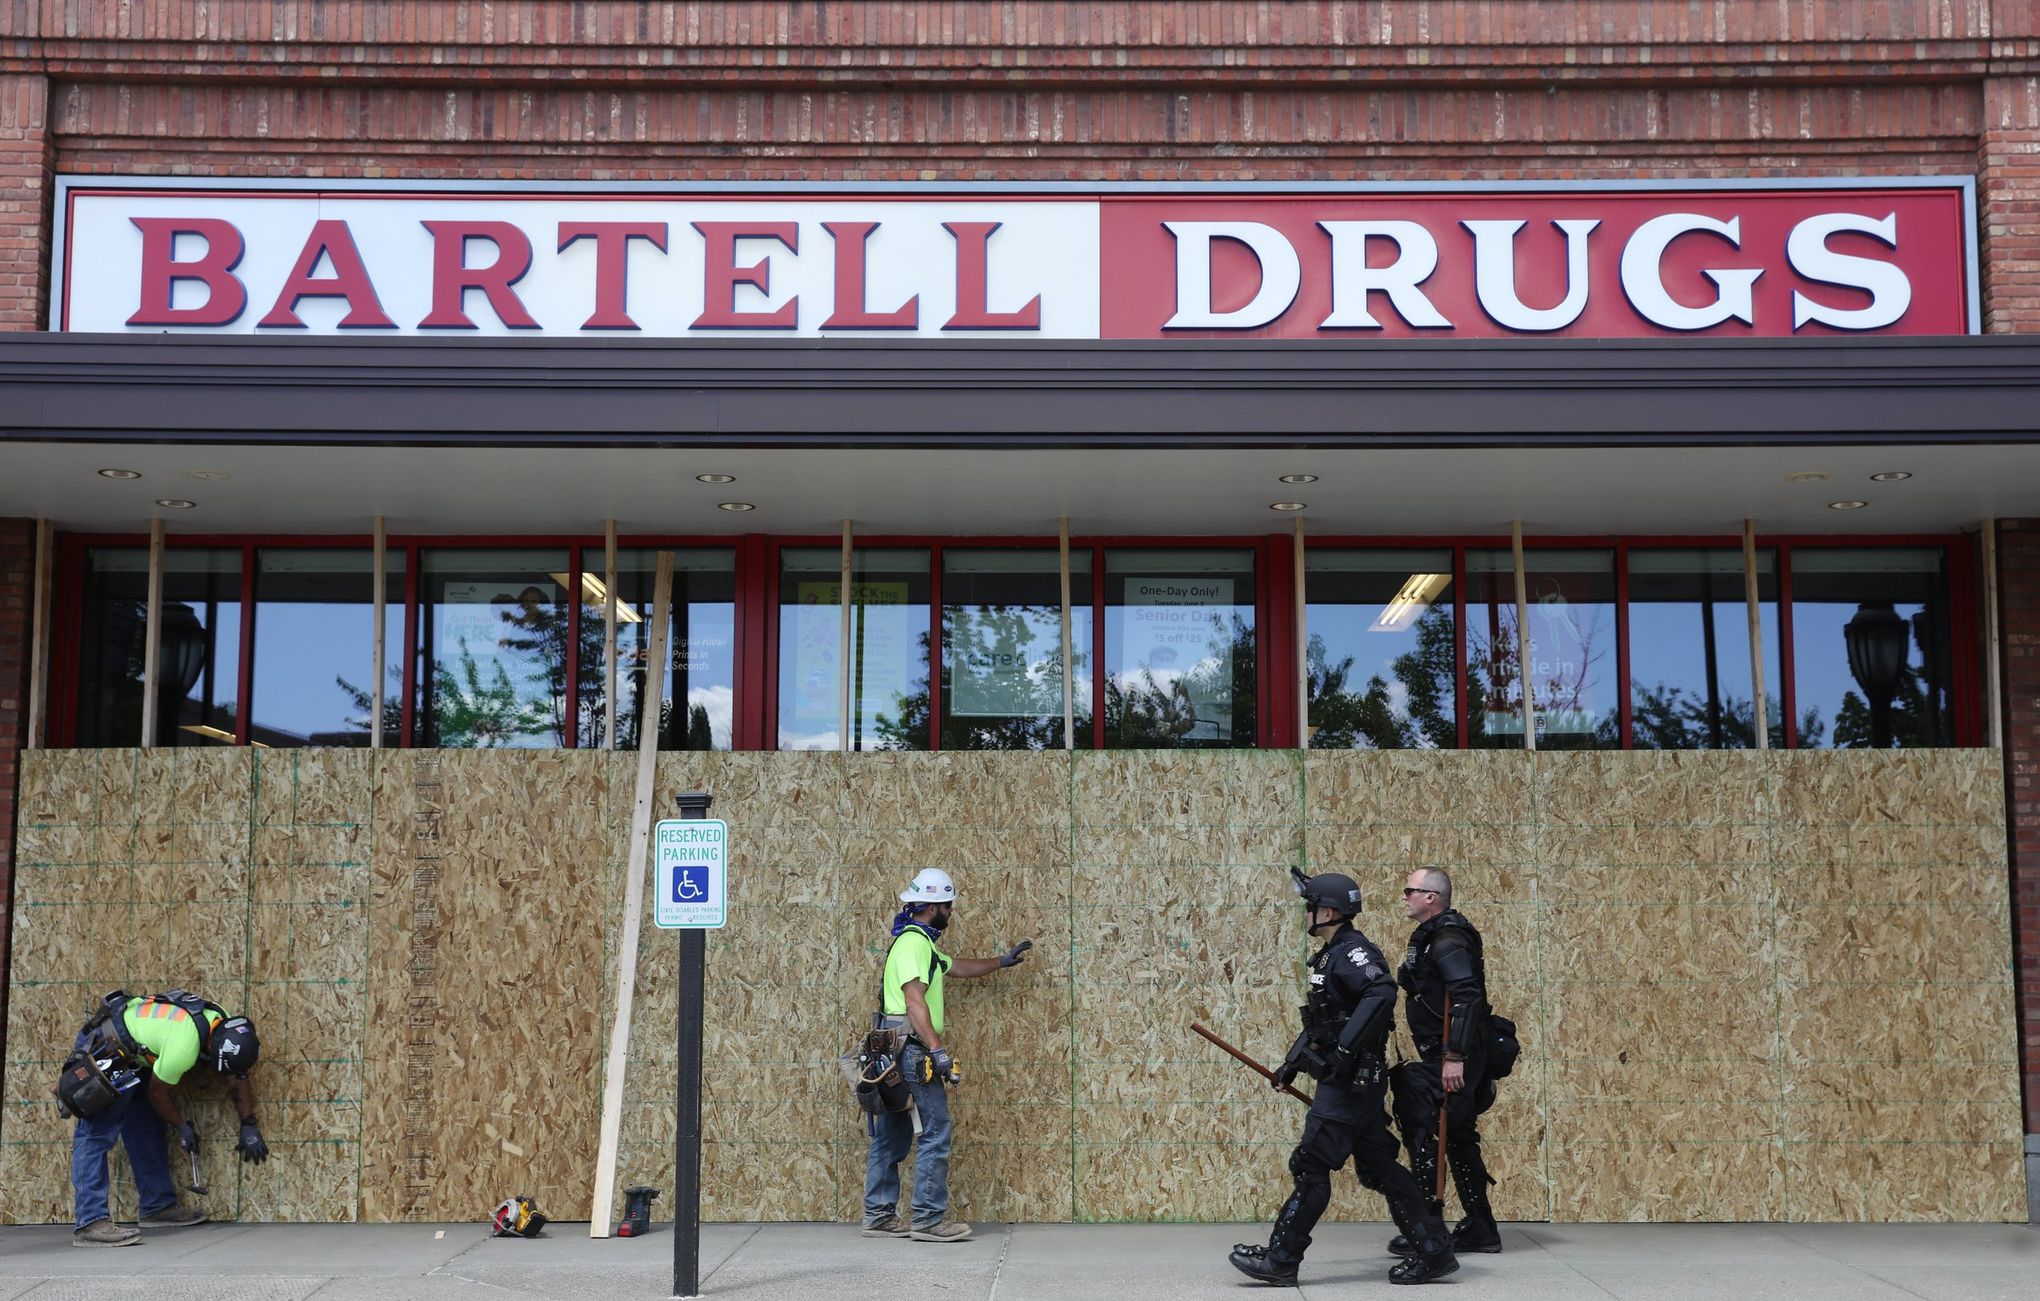 An abundance of caution': Across U.S., city storefronts boarded up